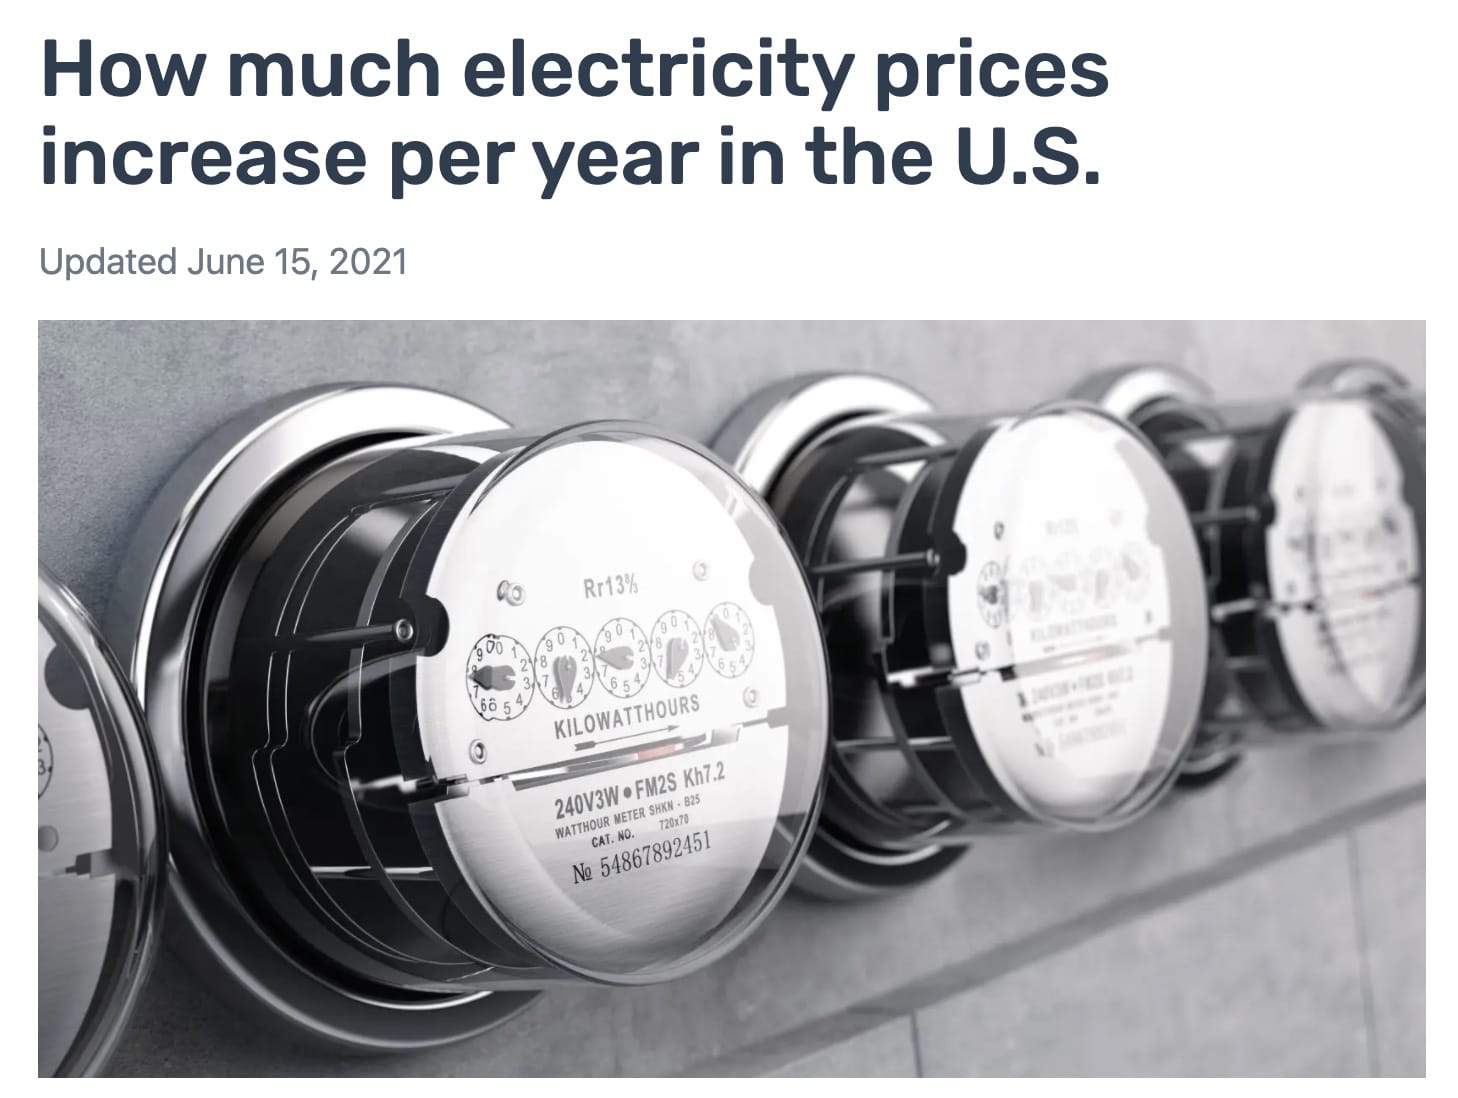 How much electricity prices increase per year in the U. S.